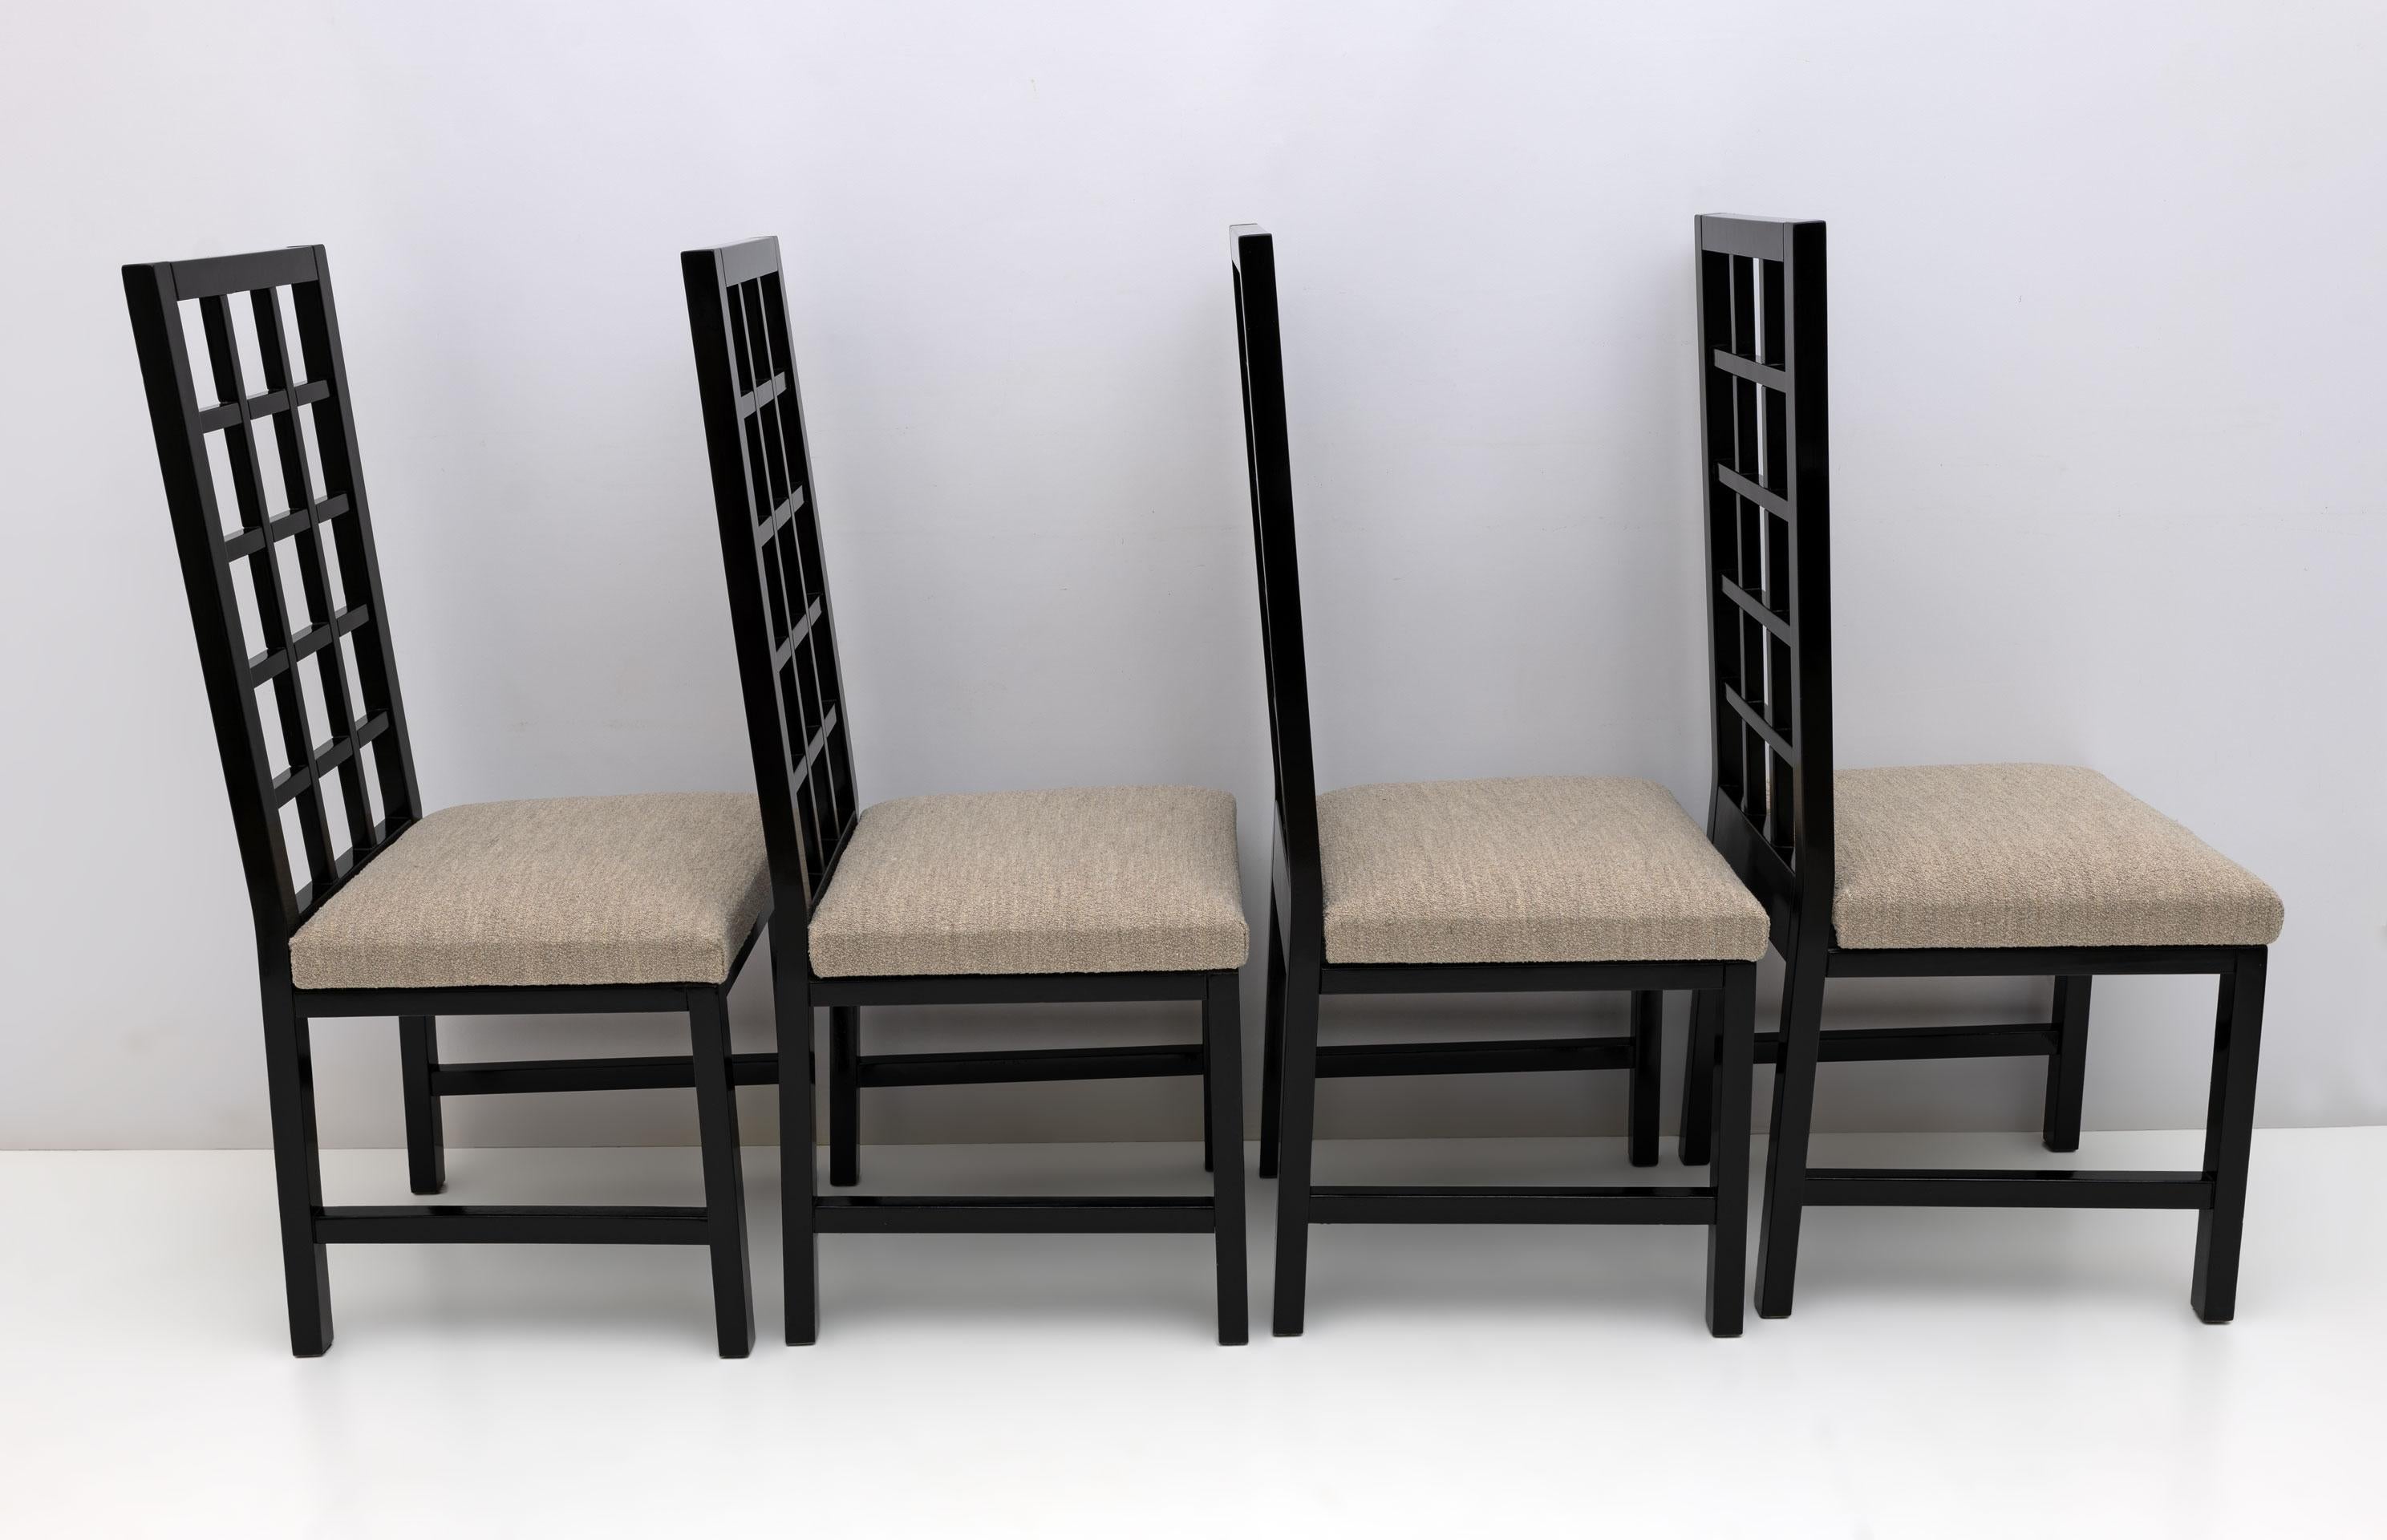 Four Mackintosh Style Black Lacquered High Back Chairs, 1979 For Sale 2